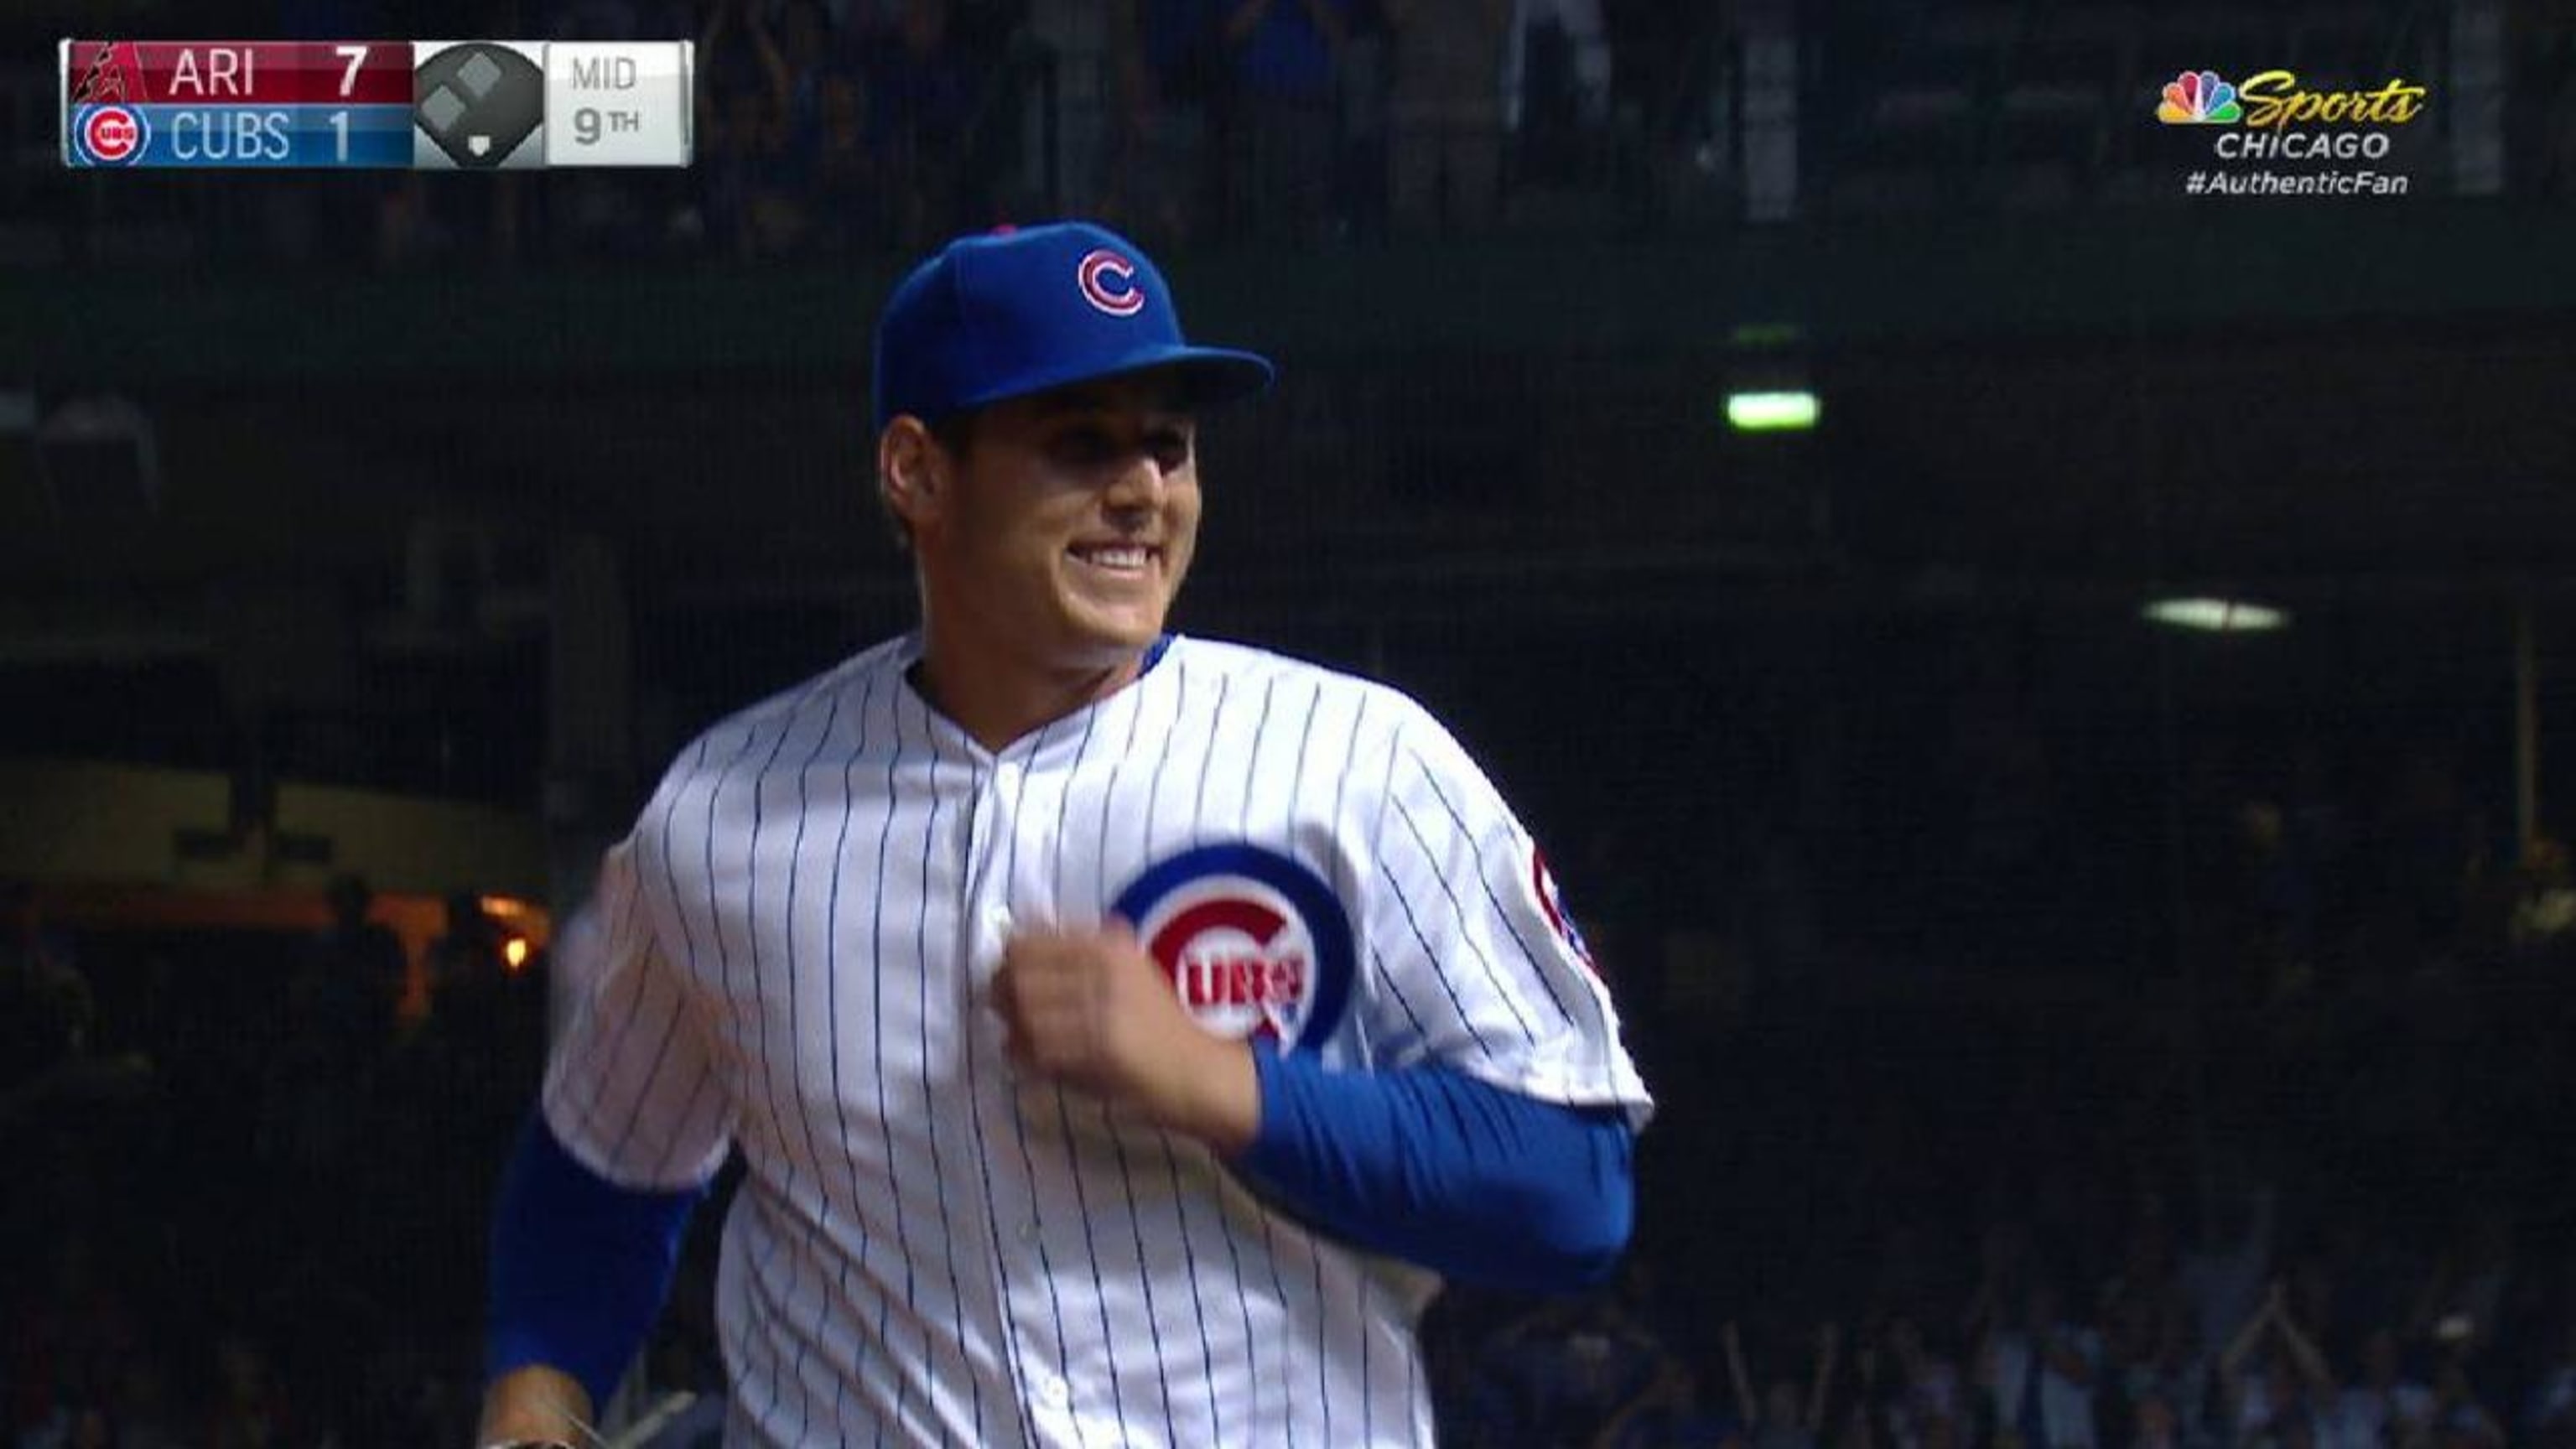 Anthony Rizzo threw two pitches to record an out in his MLB pitching debut